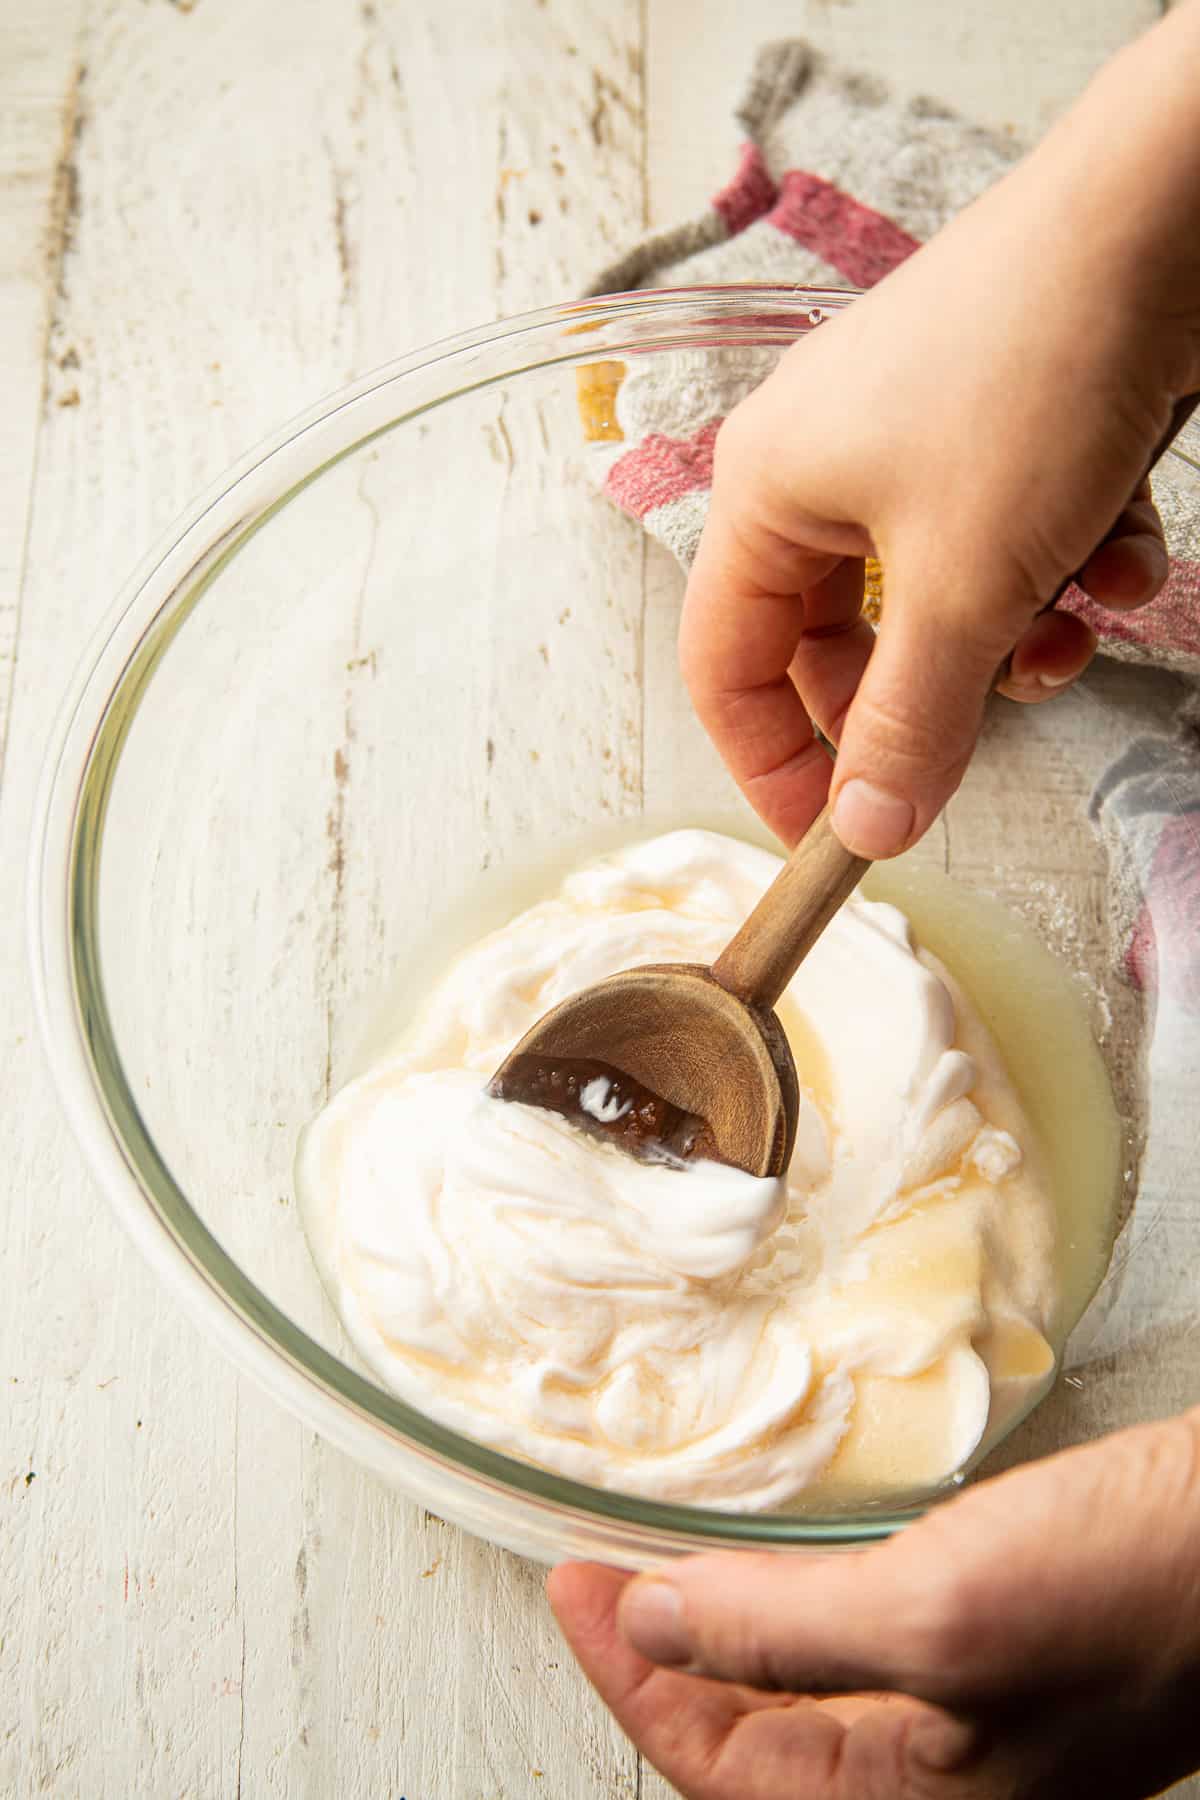 Hand stirring mayo, vinegar, and sugar together in a glass bowl.